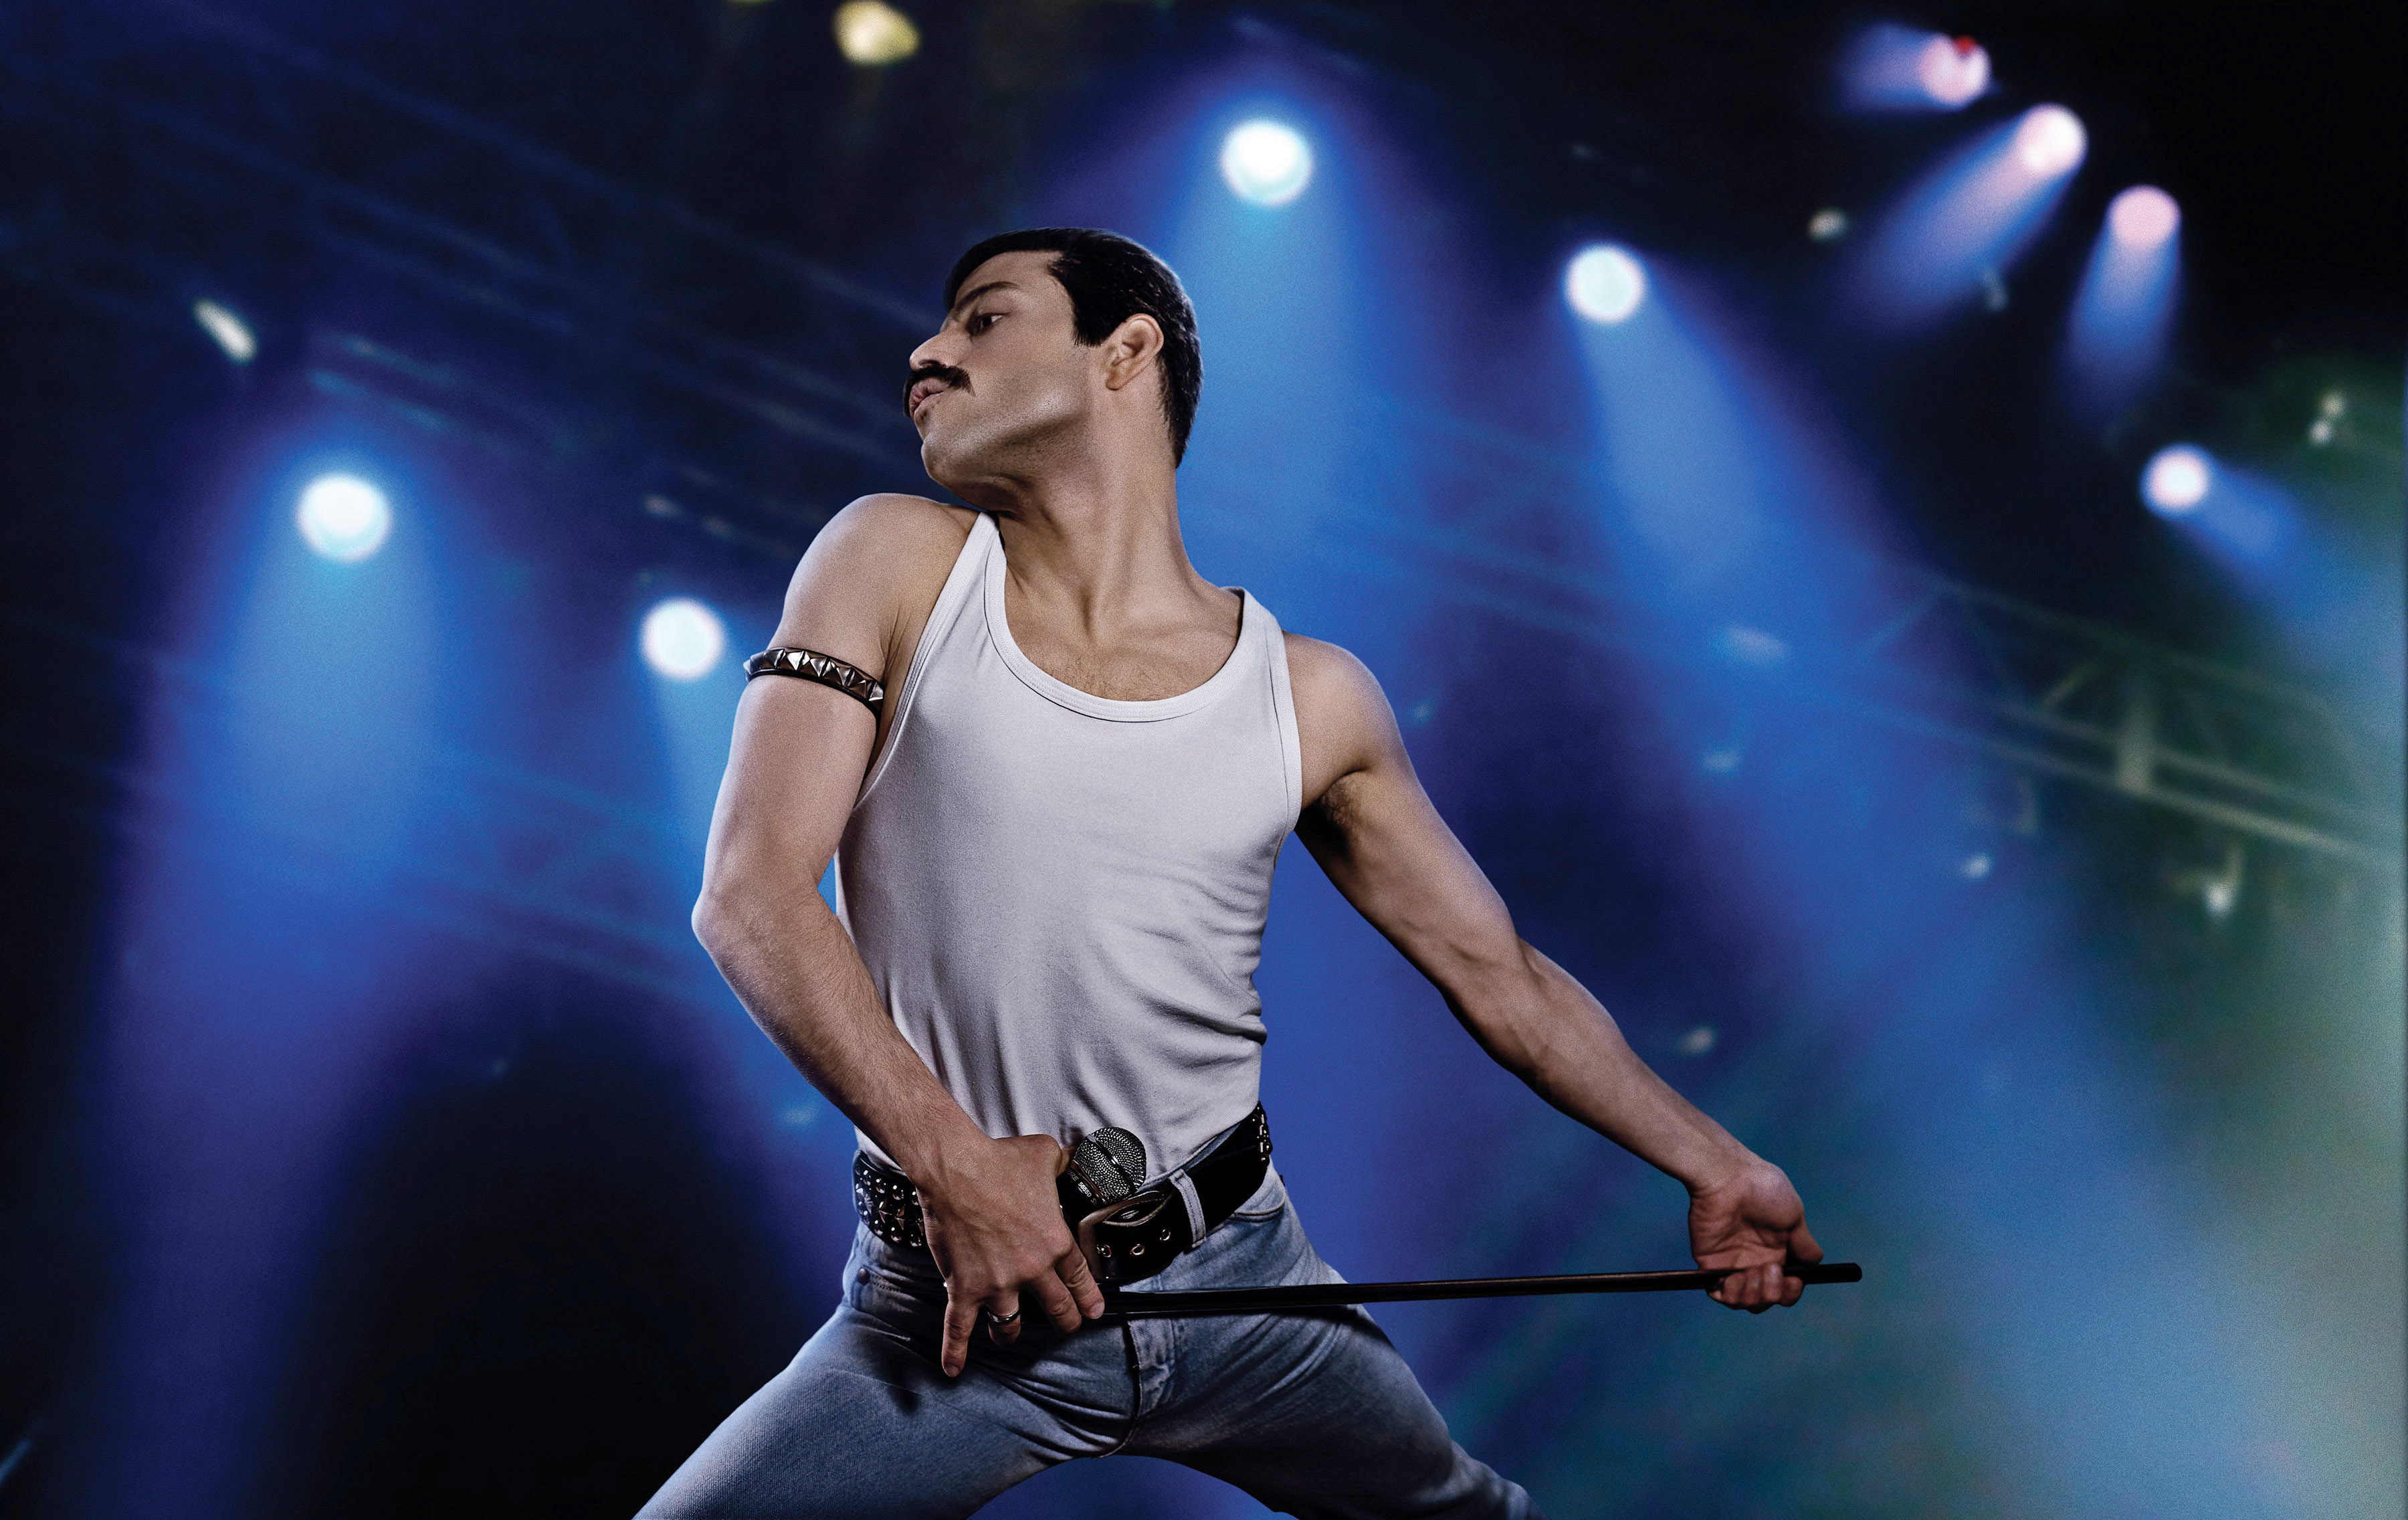 Rami Malek portrays Freddie Mercury on stage with a microphone stand in &quot;Bohemian Rhapsody.&quot;